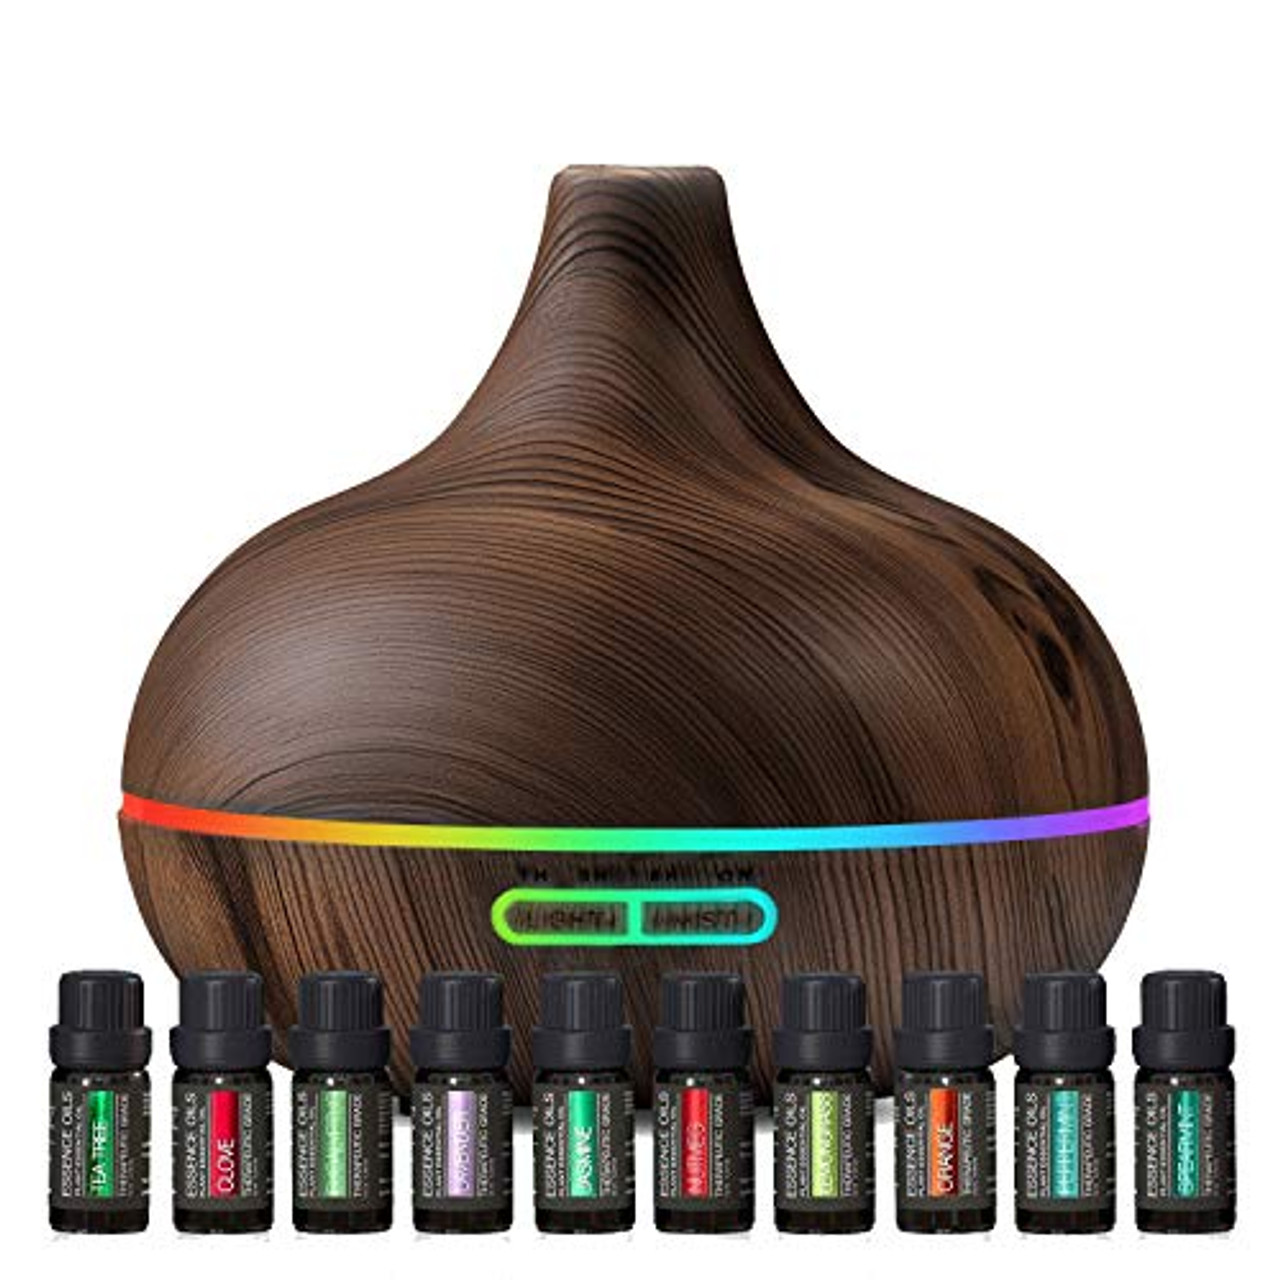 Ultimate Aromatherapy Diffuser & Essential Oil Set - Ultrasonic Diffuser &  Top 10 Essential Oils - 300ml Diffuser with 4 Timer & 7 Ambient Light  Settings - Therapeutic Grade Essential Oils - Dark Oak…